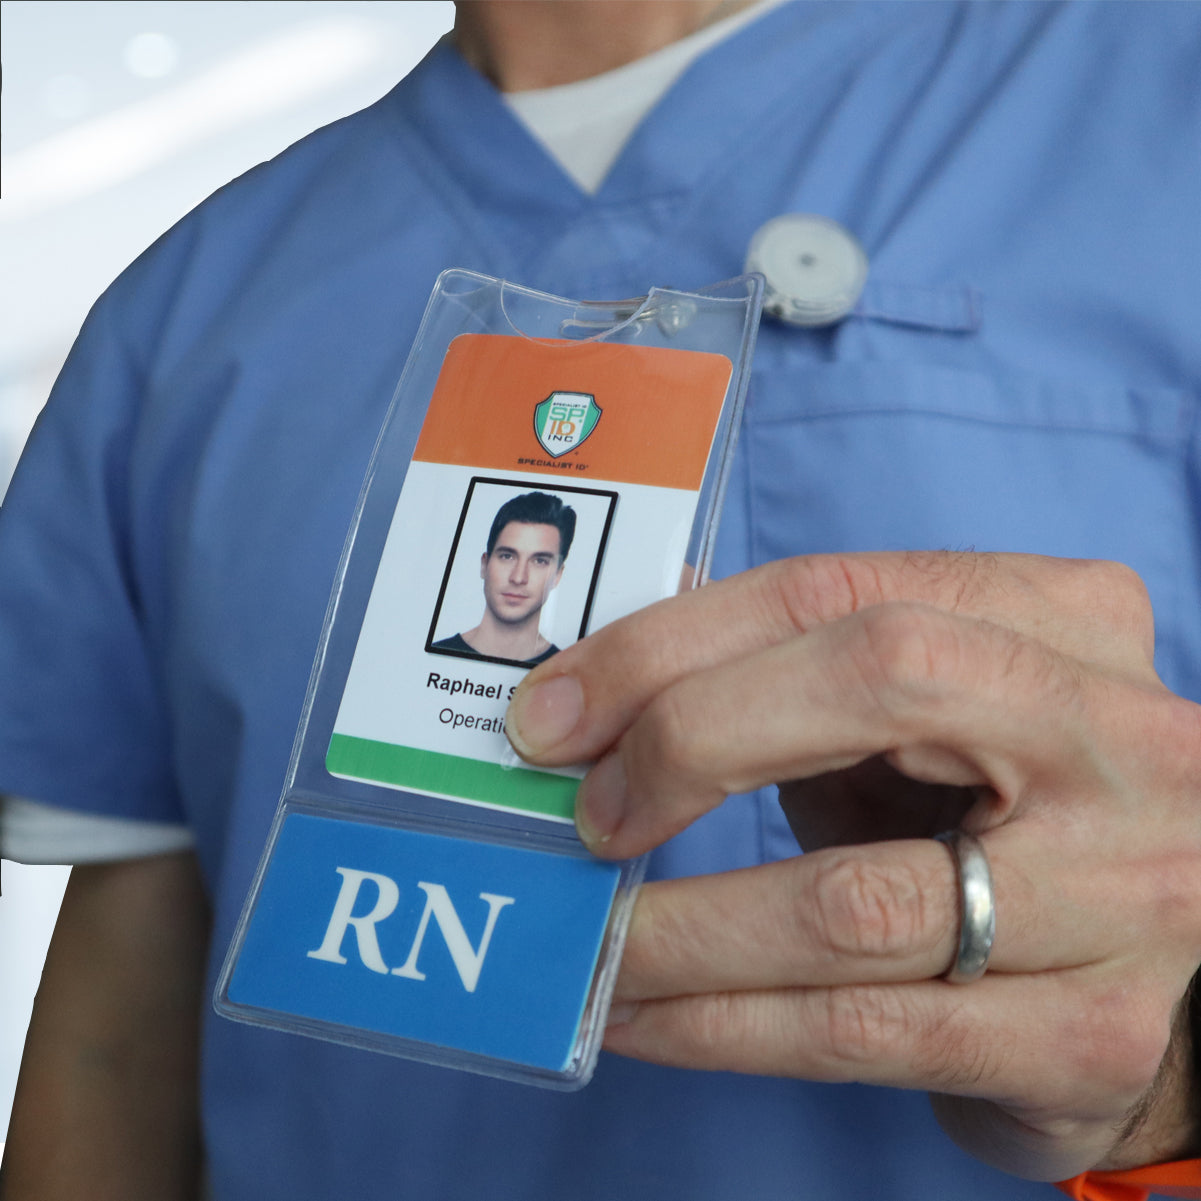 A person wearing a blue uniform holds up a Custom Printed BadgeBottoms® Vertical (Badge Holder & Badge Buddy IN ONE!!) showcasing their hospital ID with a photo, name "Raphael," and title "Operations Room Nurse," with "RN" prominently displayed at the bottom.